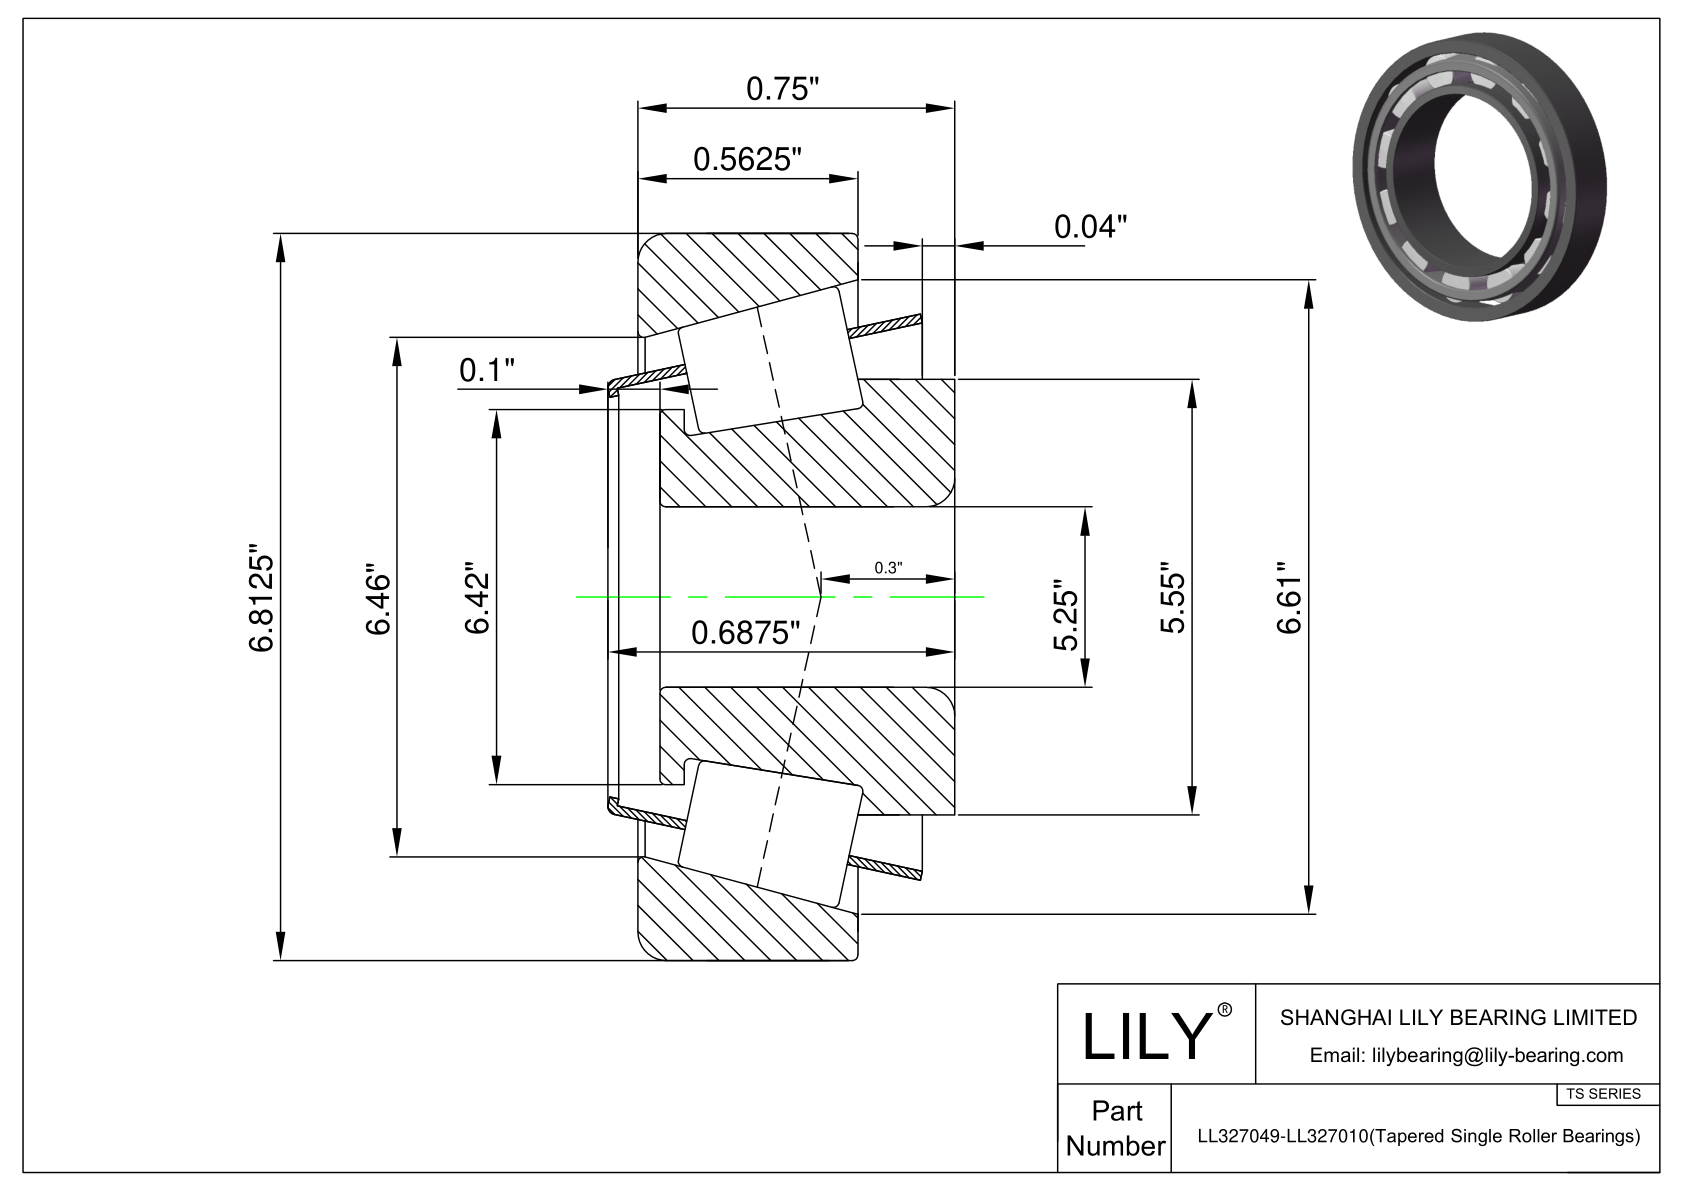 LL327049-LL327010 TS (Tapered Single Roller Bearings) (Imperial) cad drawing